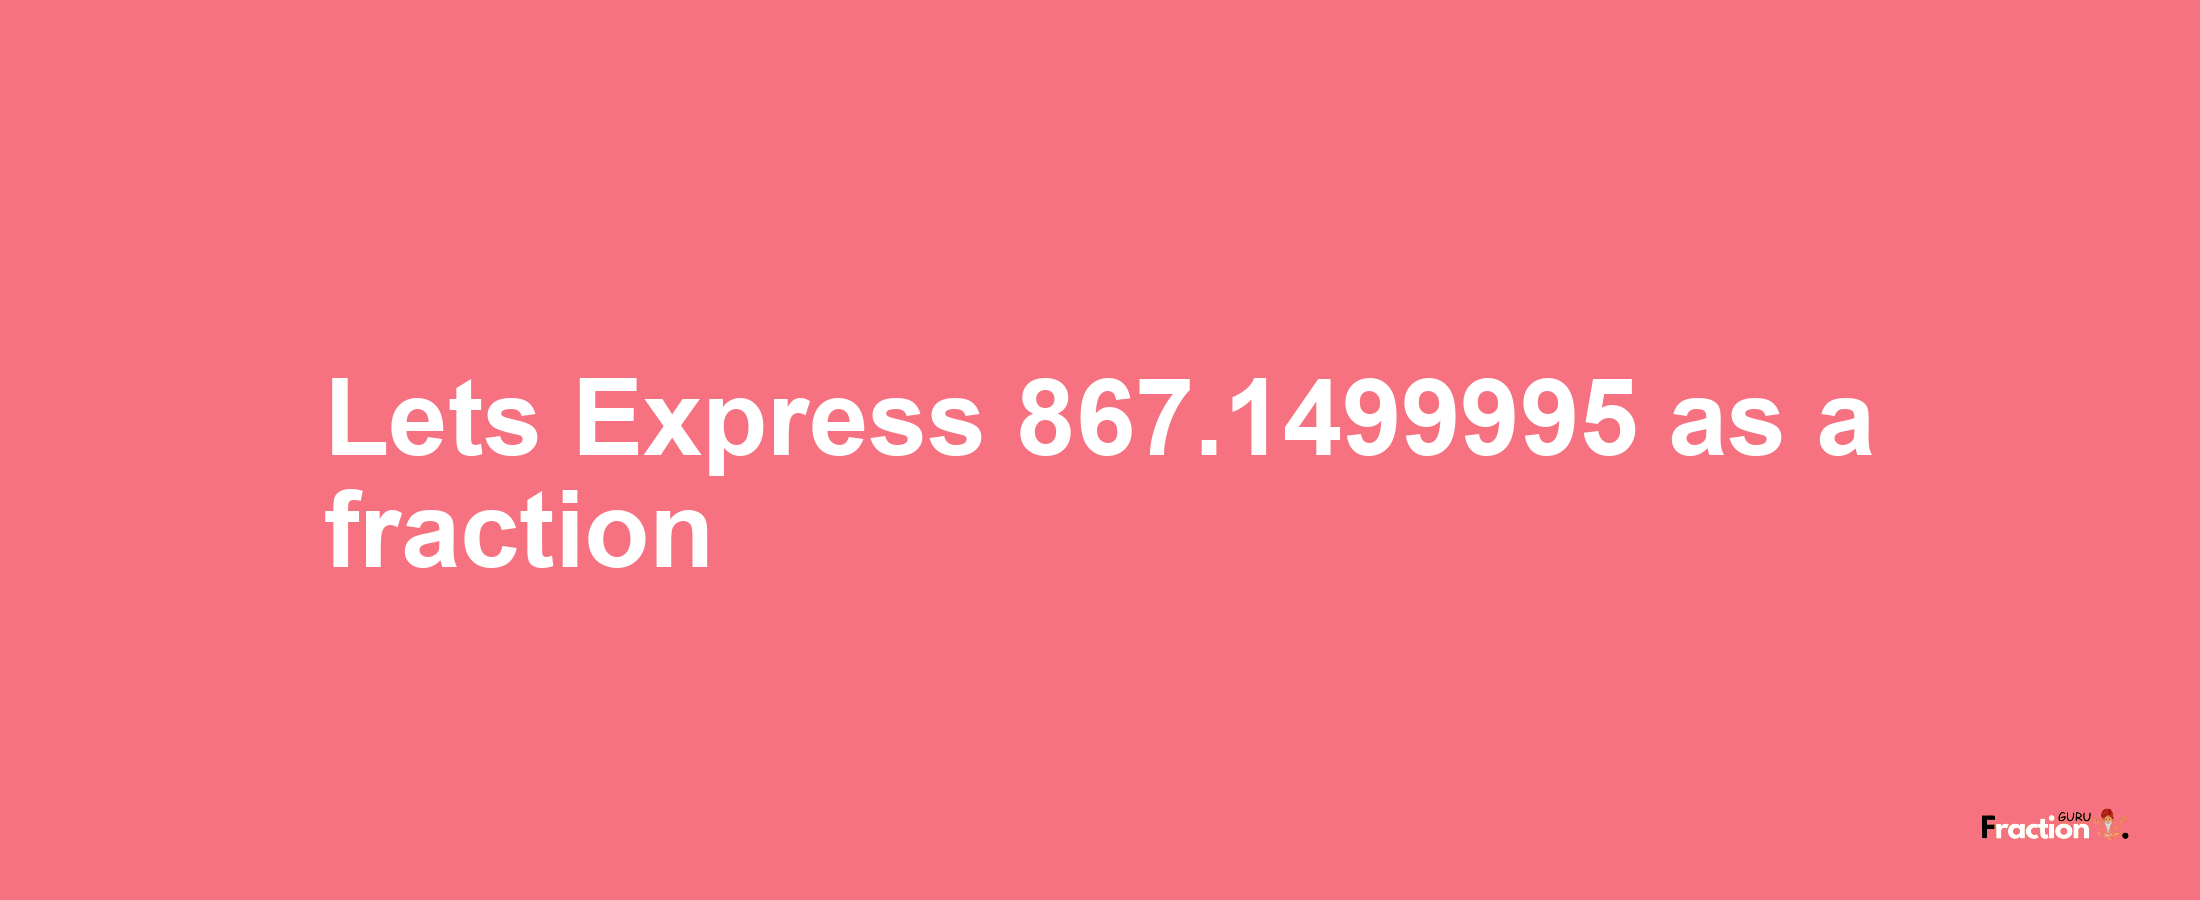 Lets Express 867.1499995 as afraction